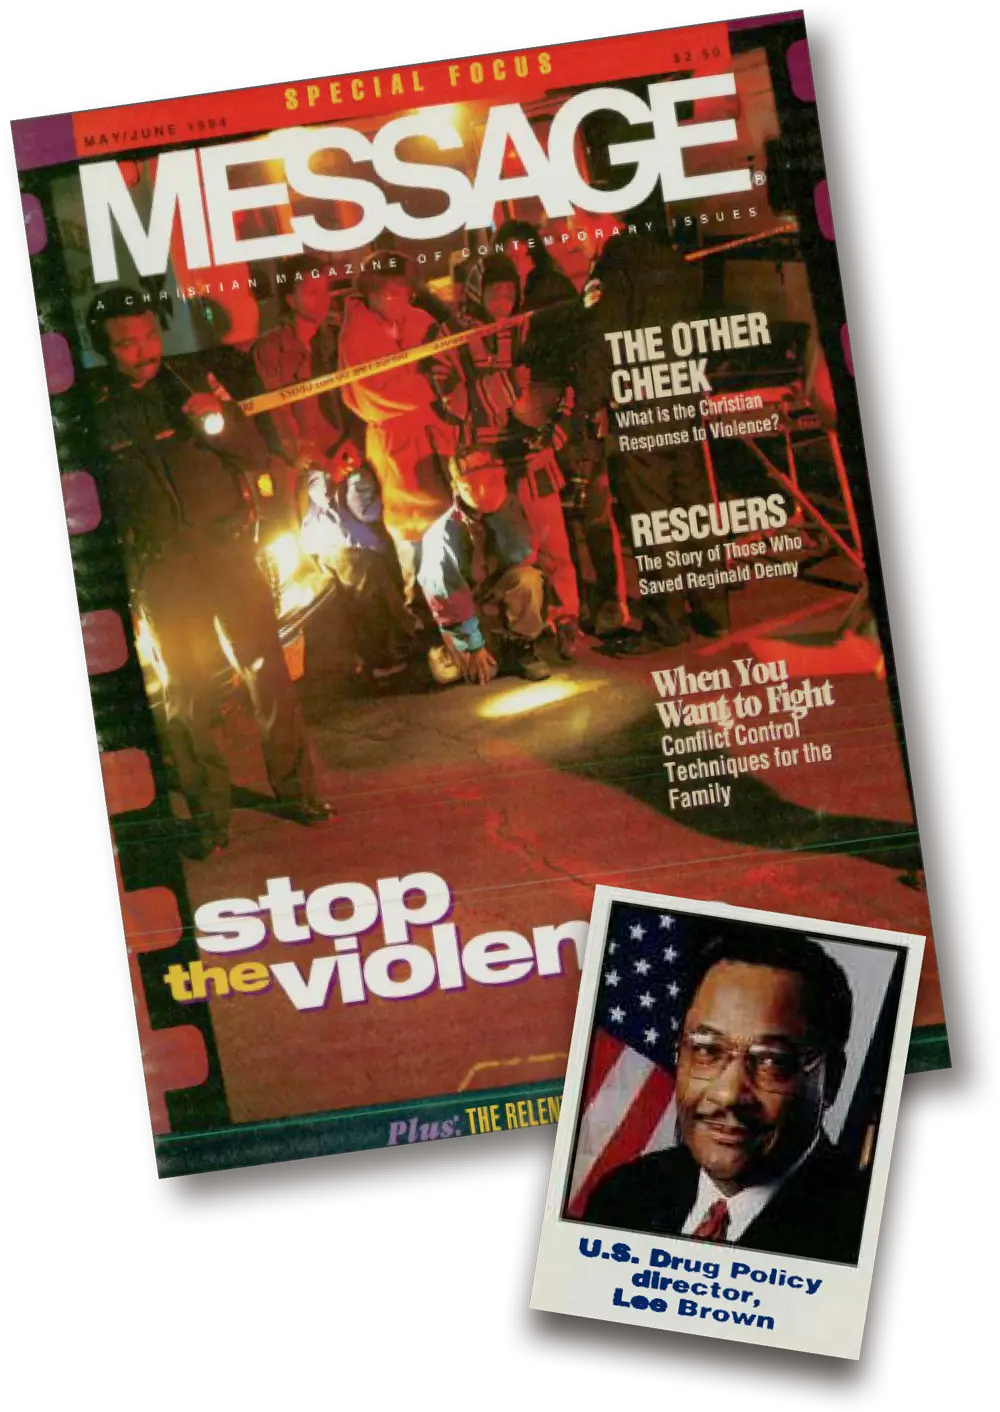 May/June 1994 issue cover of Message Magazine featuring "Stop the Violence"